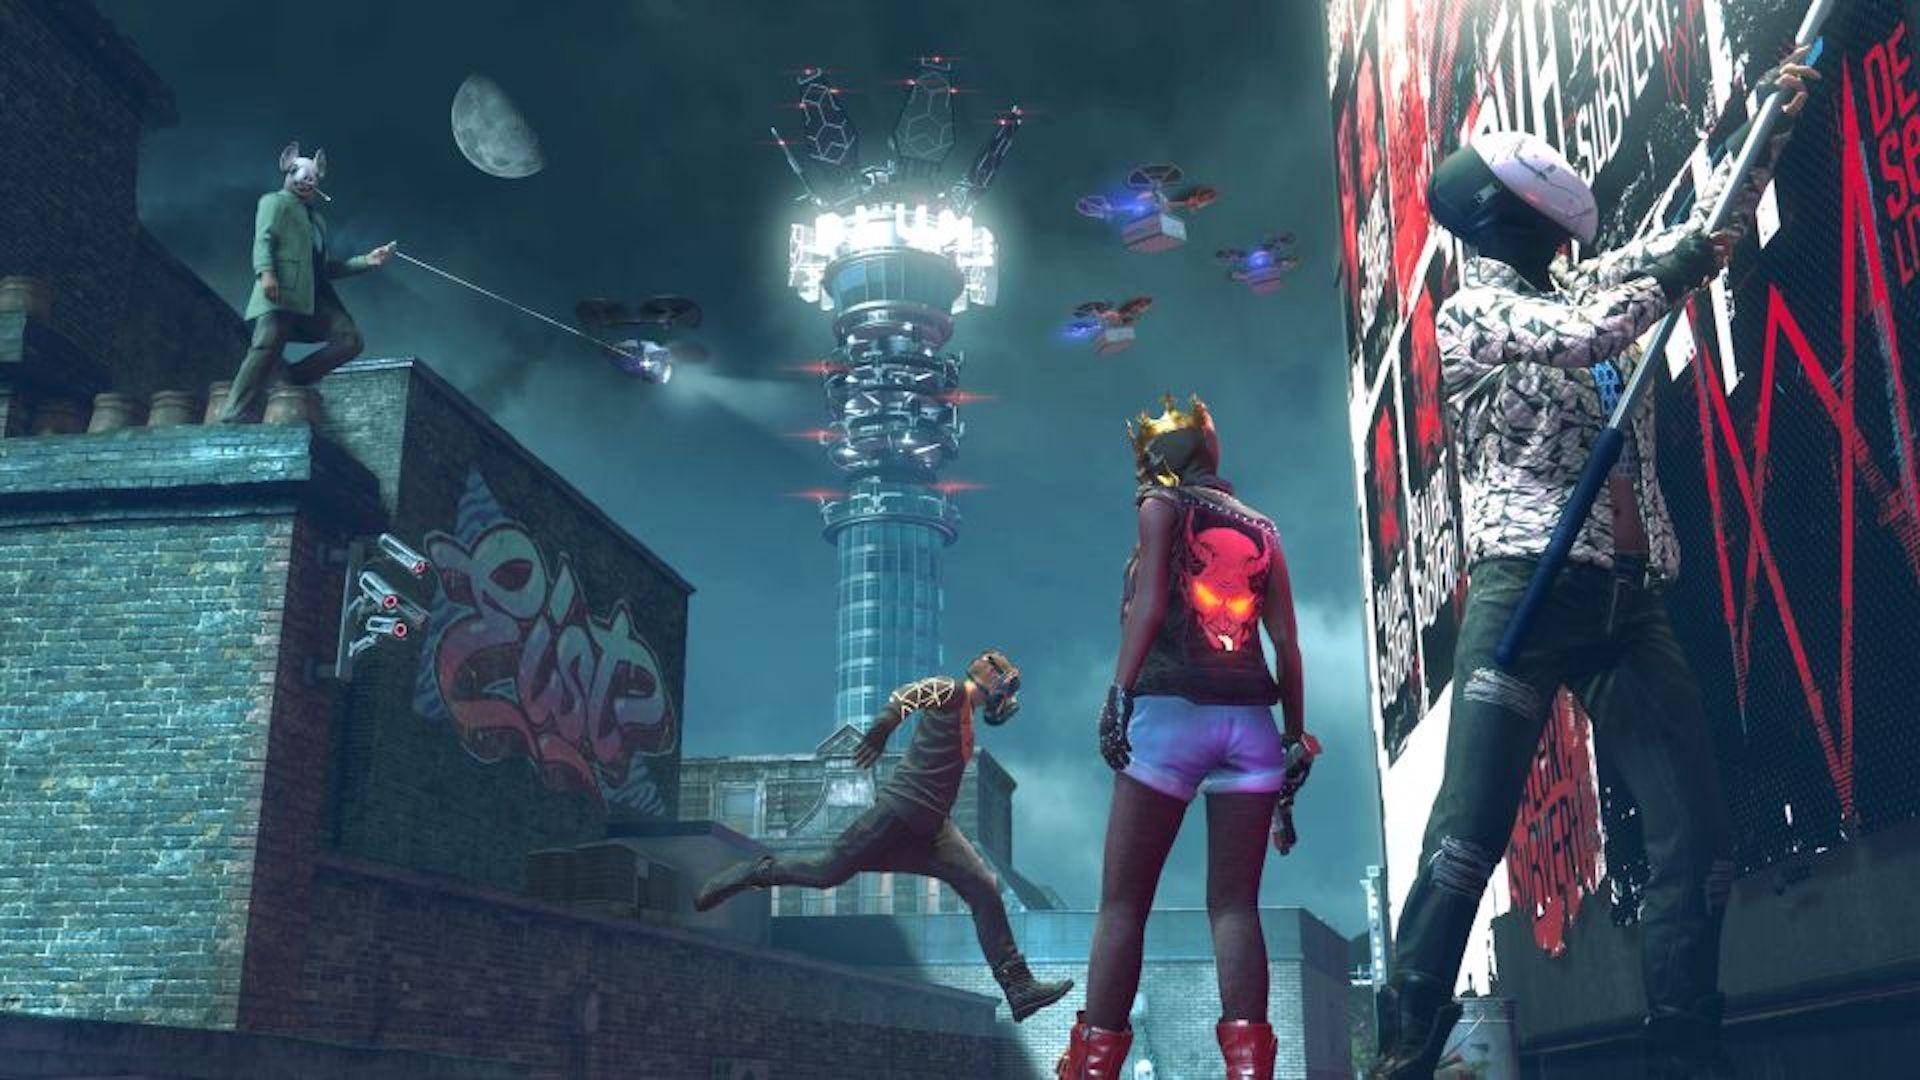 Watch Dogs Legion online mode makes its debut today